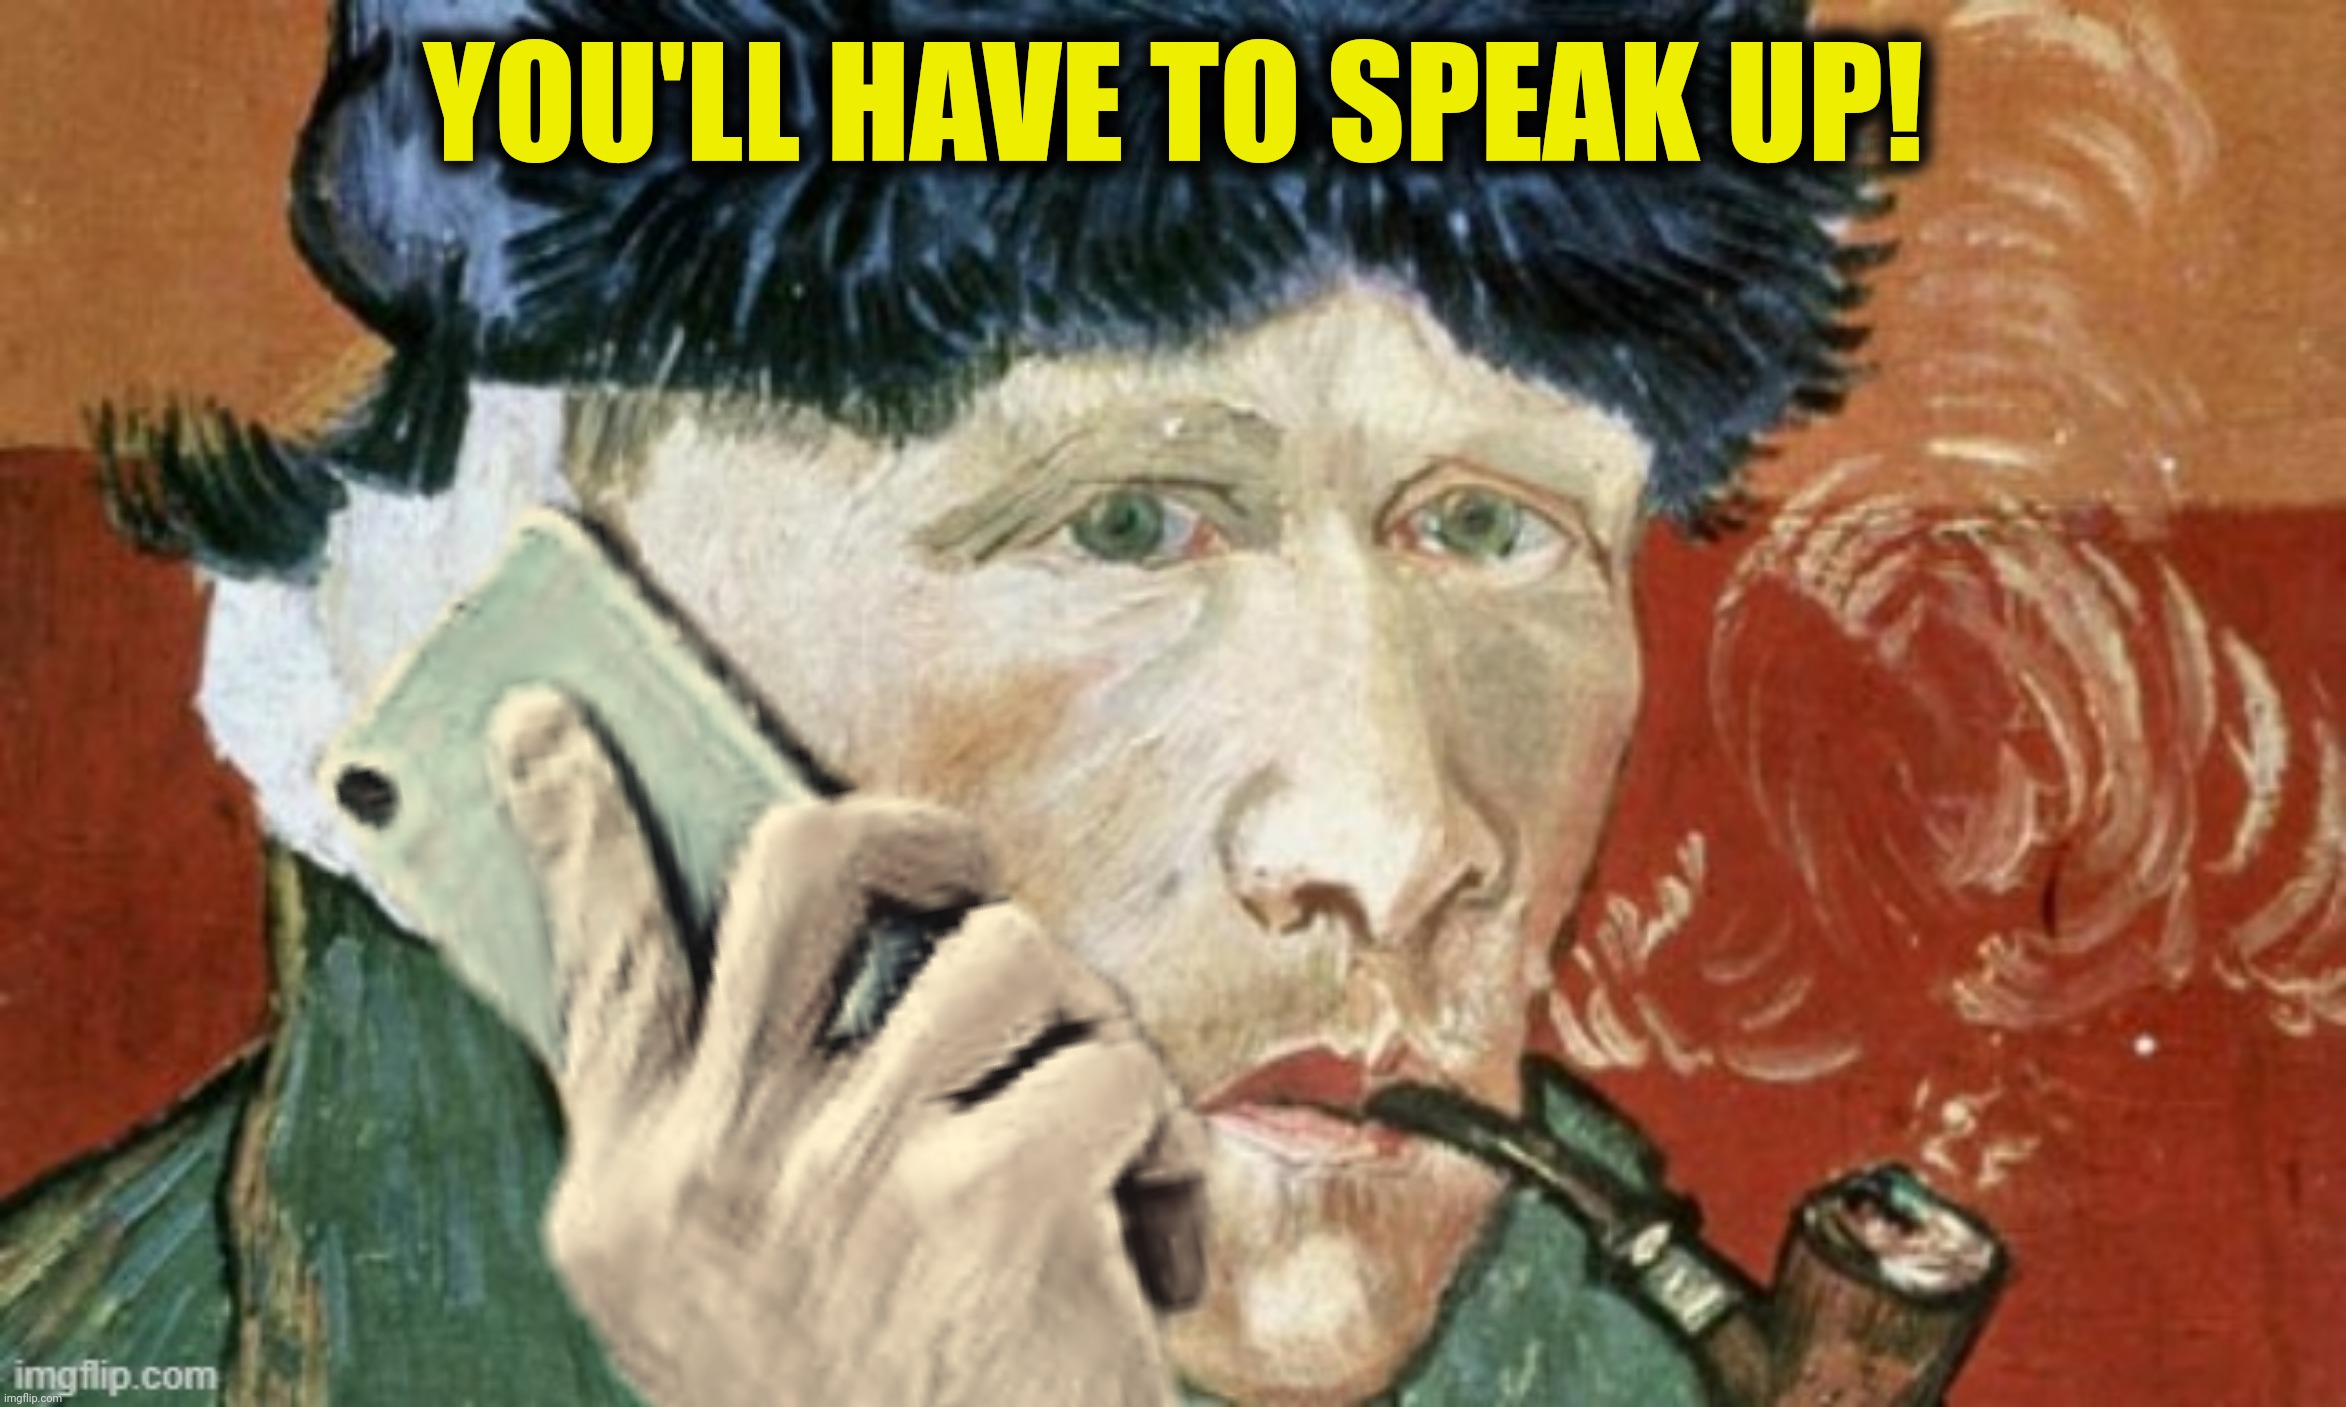 YOU'LL HAVE TO SPEAK UP! | made w/ Imgflip meme maker